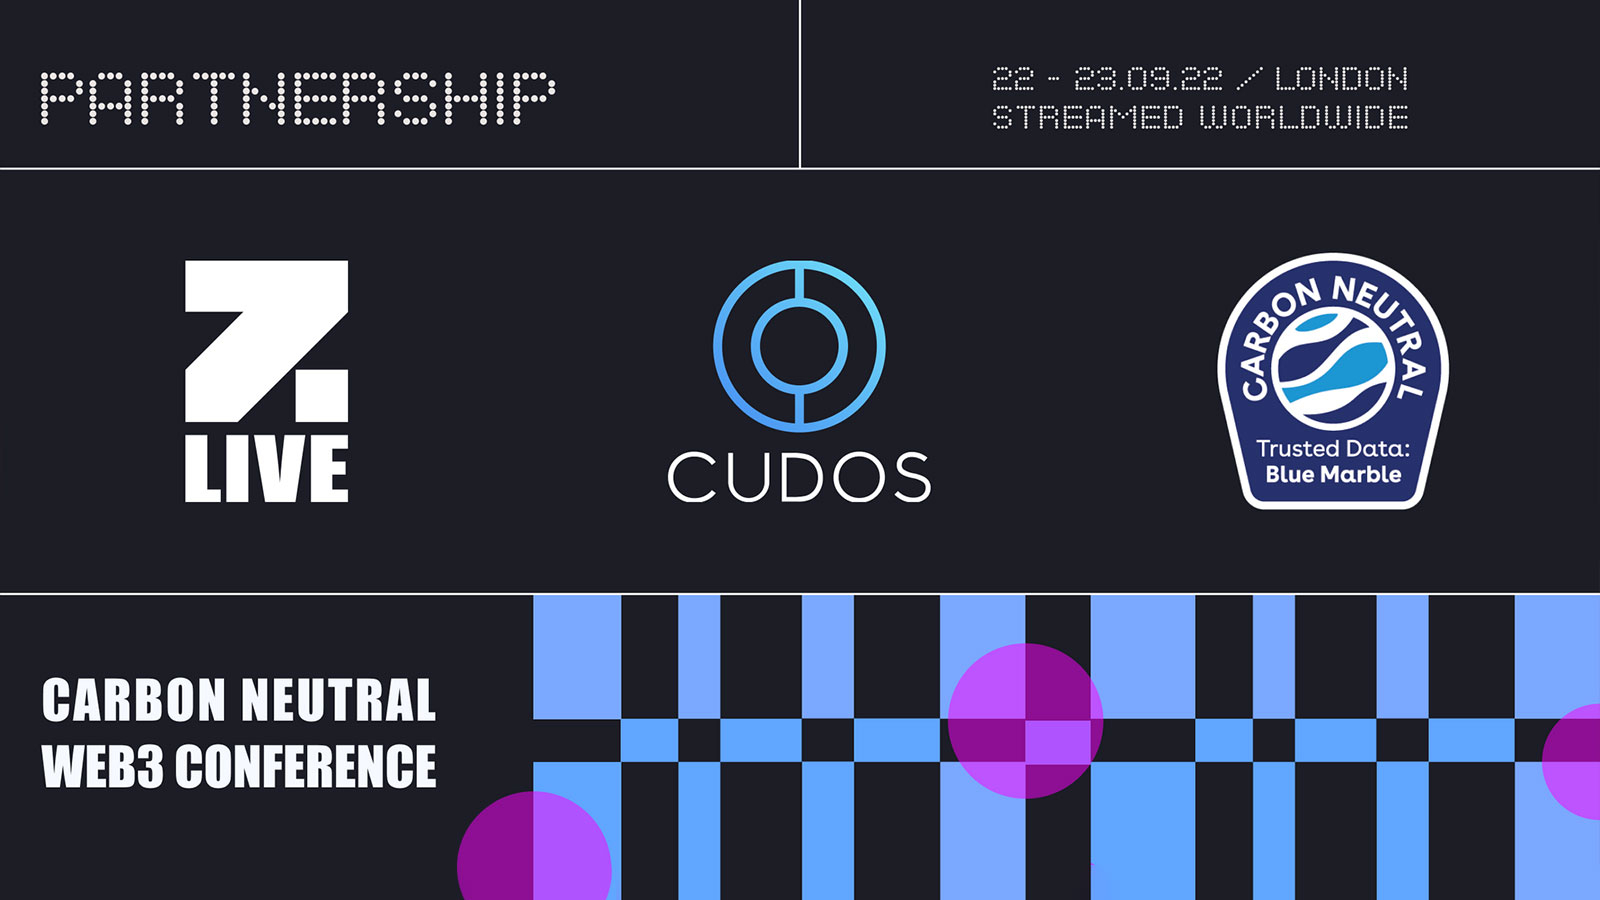 Cudos And Blue Marble Partner With Zebu Live To Make The Web3 Conference A Certified Carbon Neutral Event